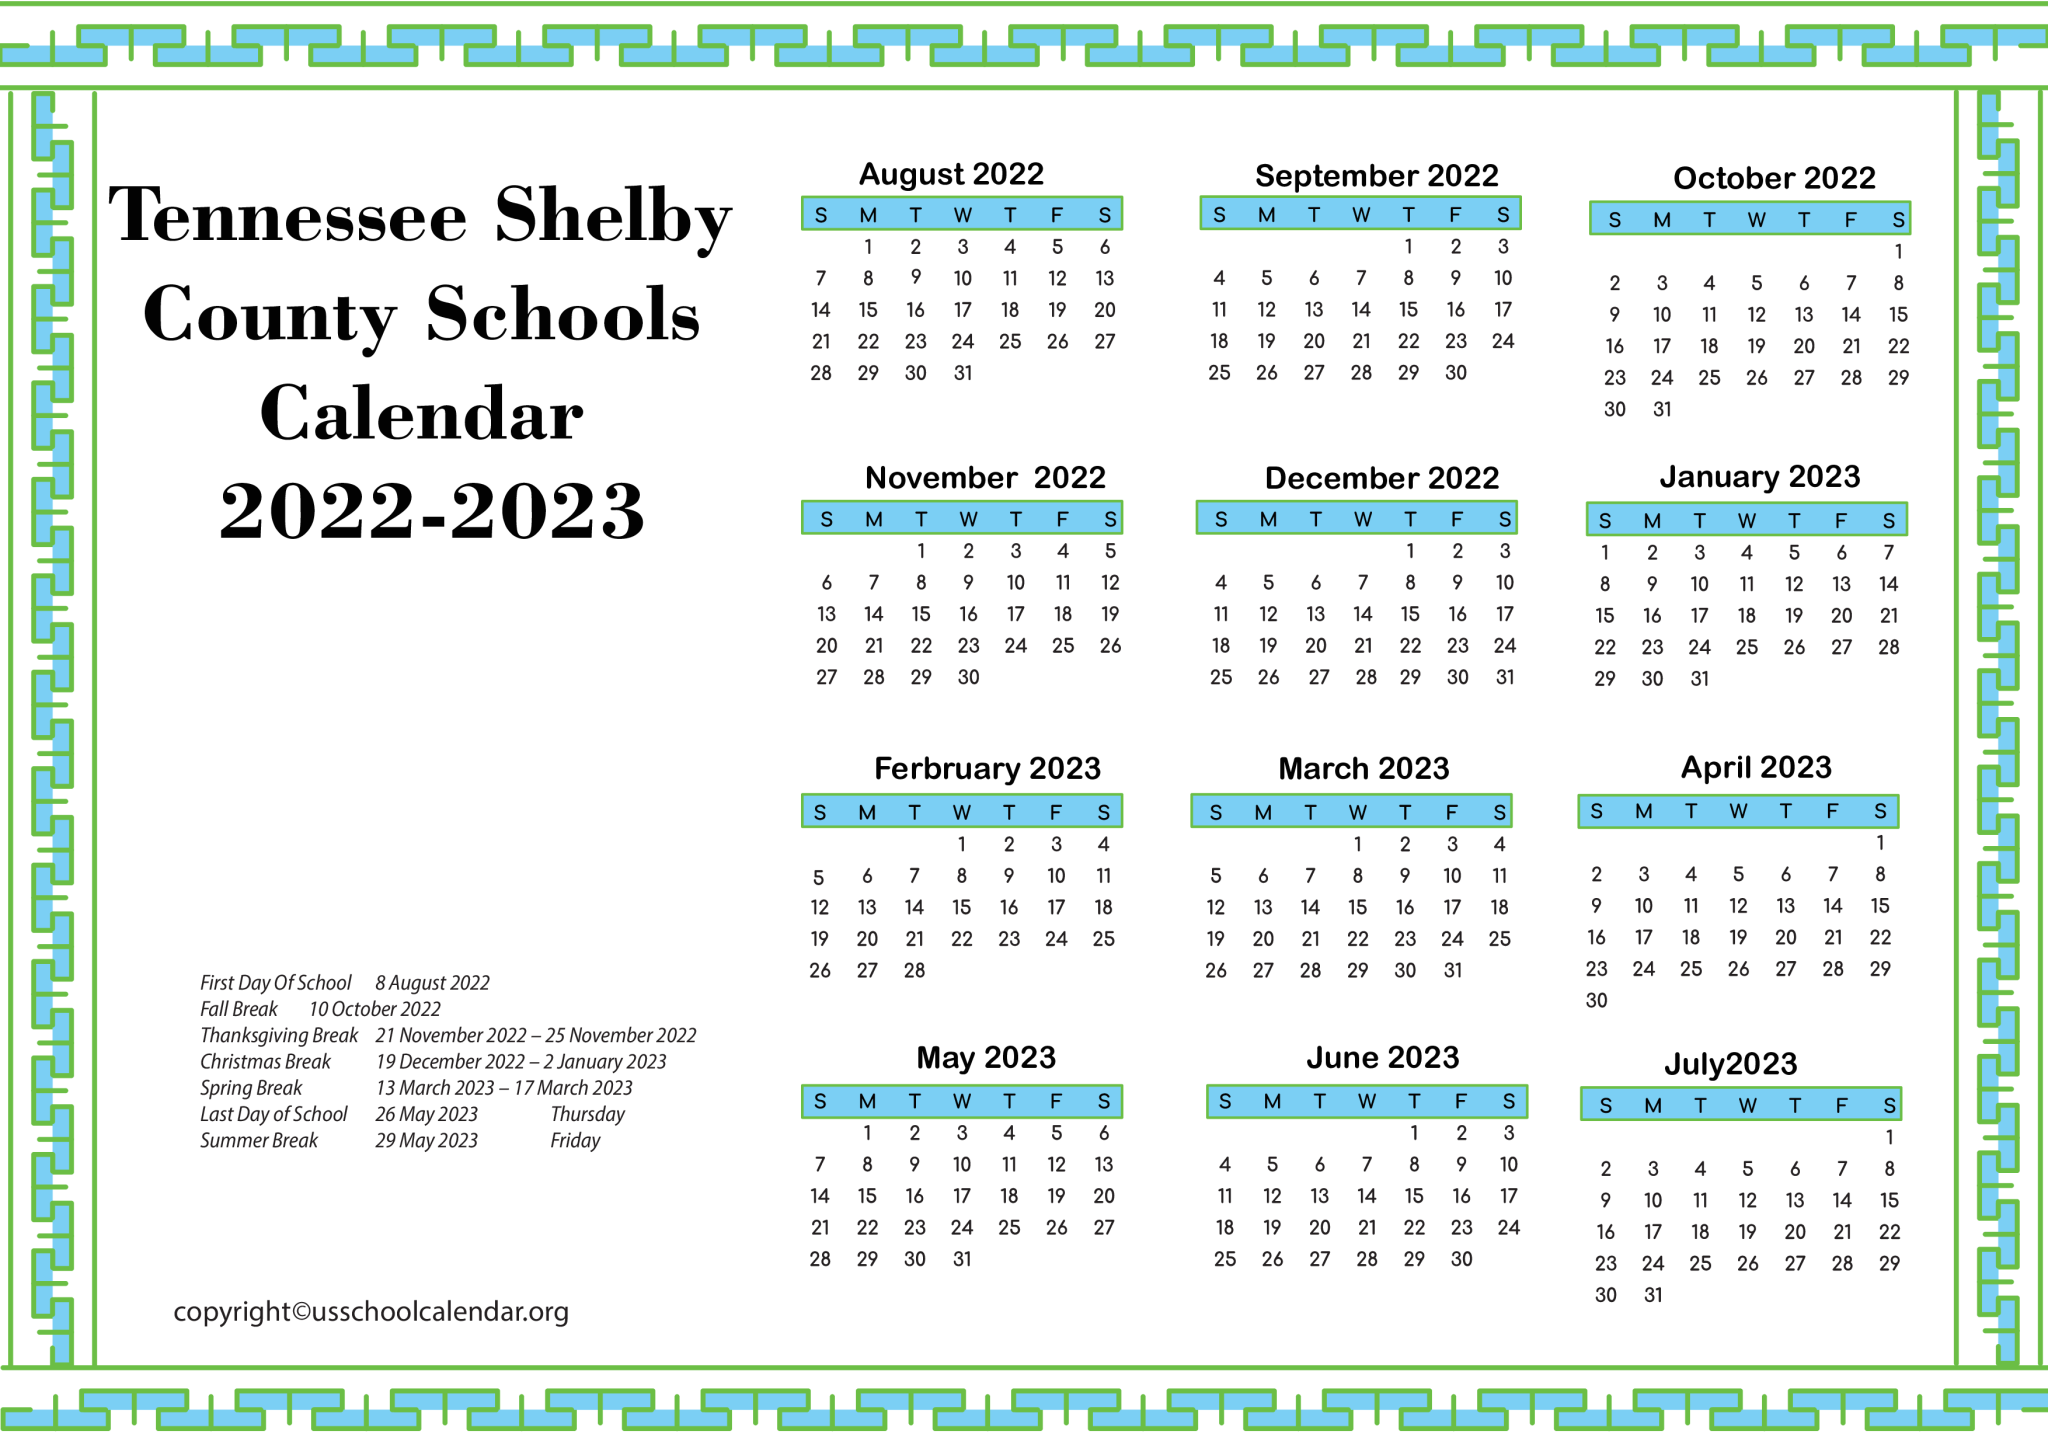 tennessee-shelby-county-schools-calendar-2022-2023